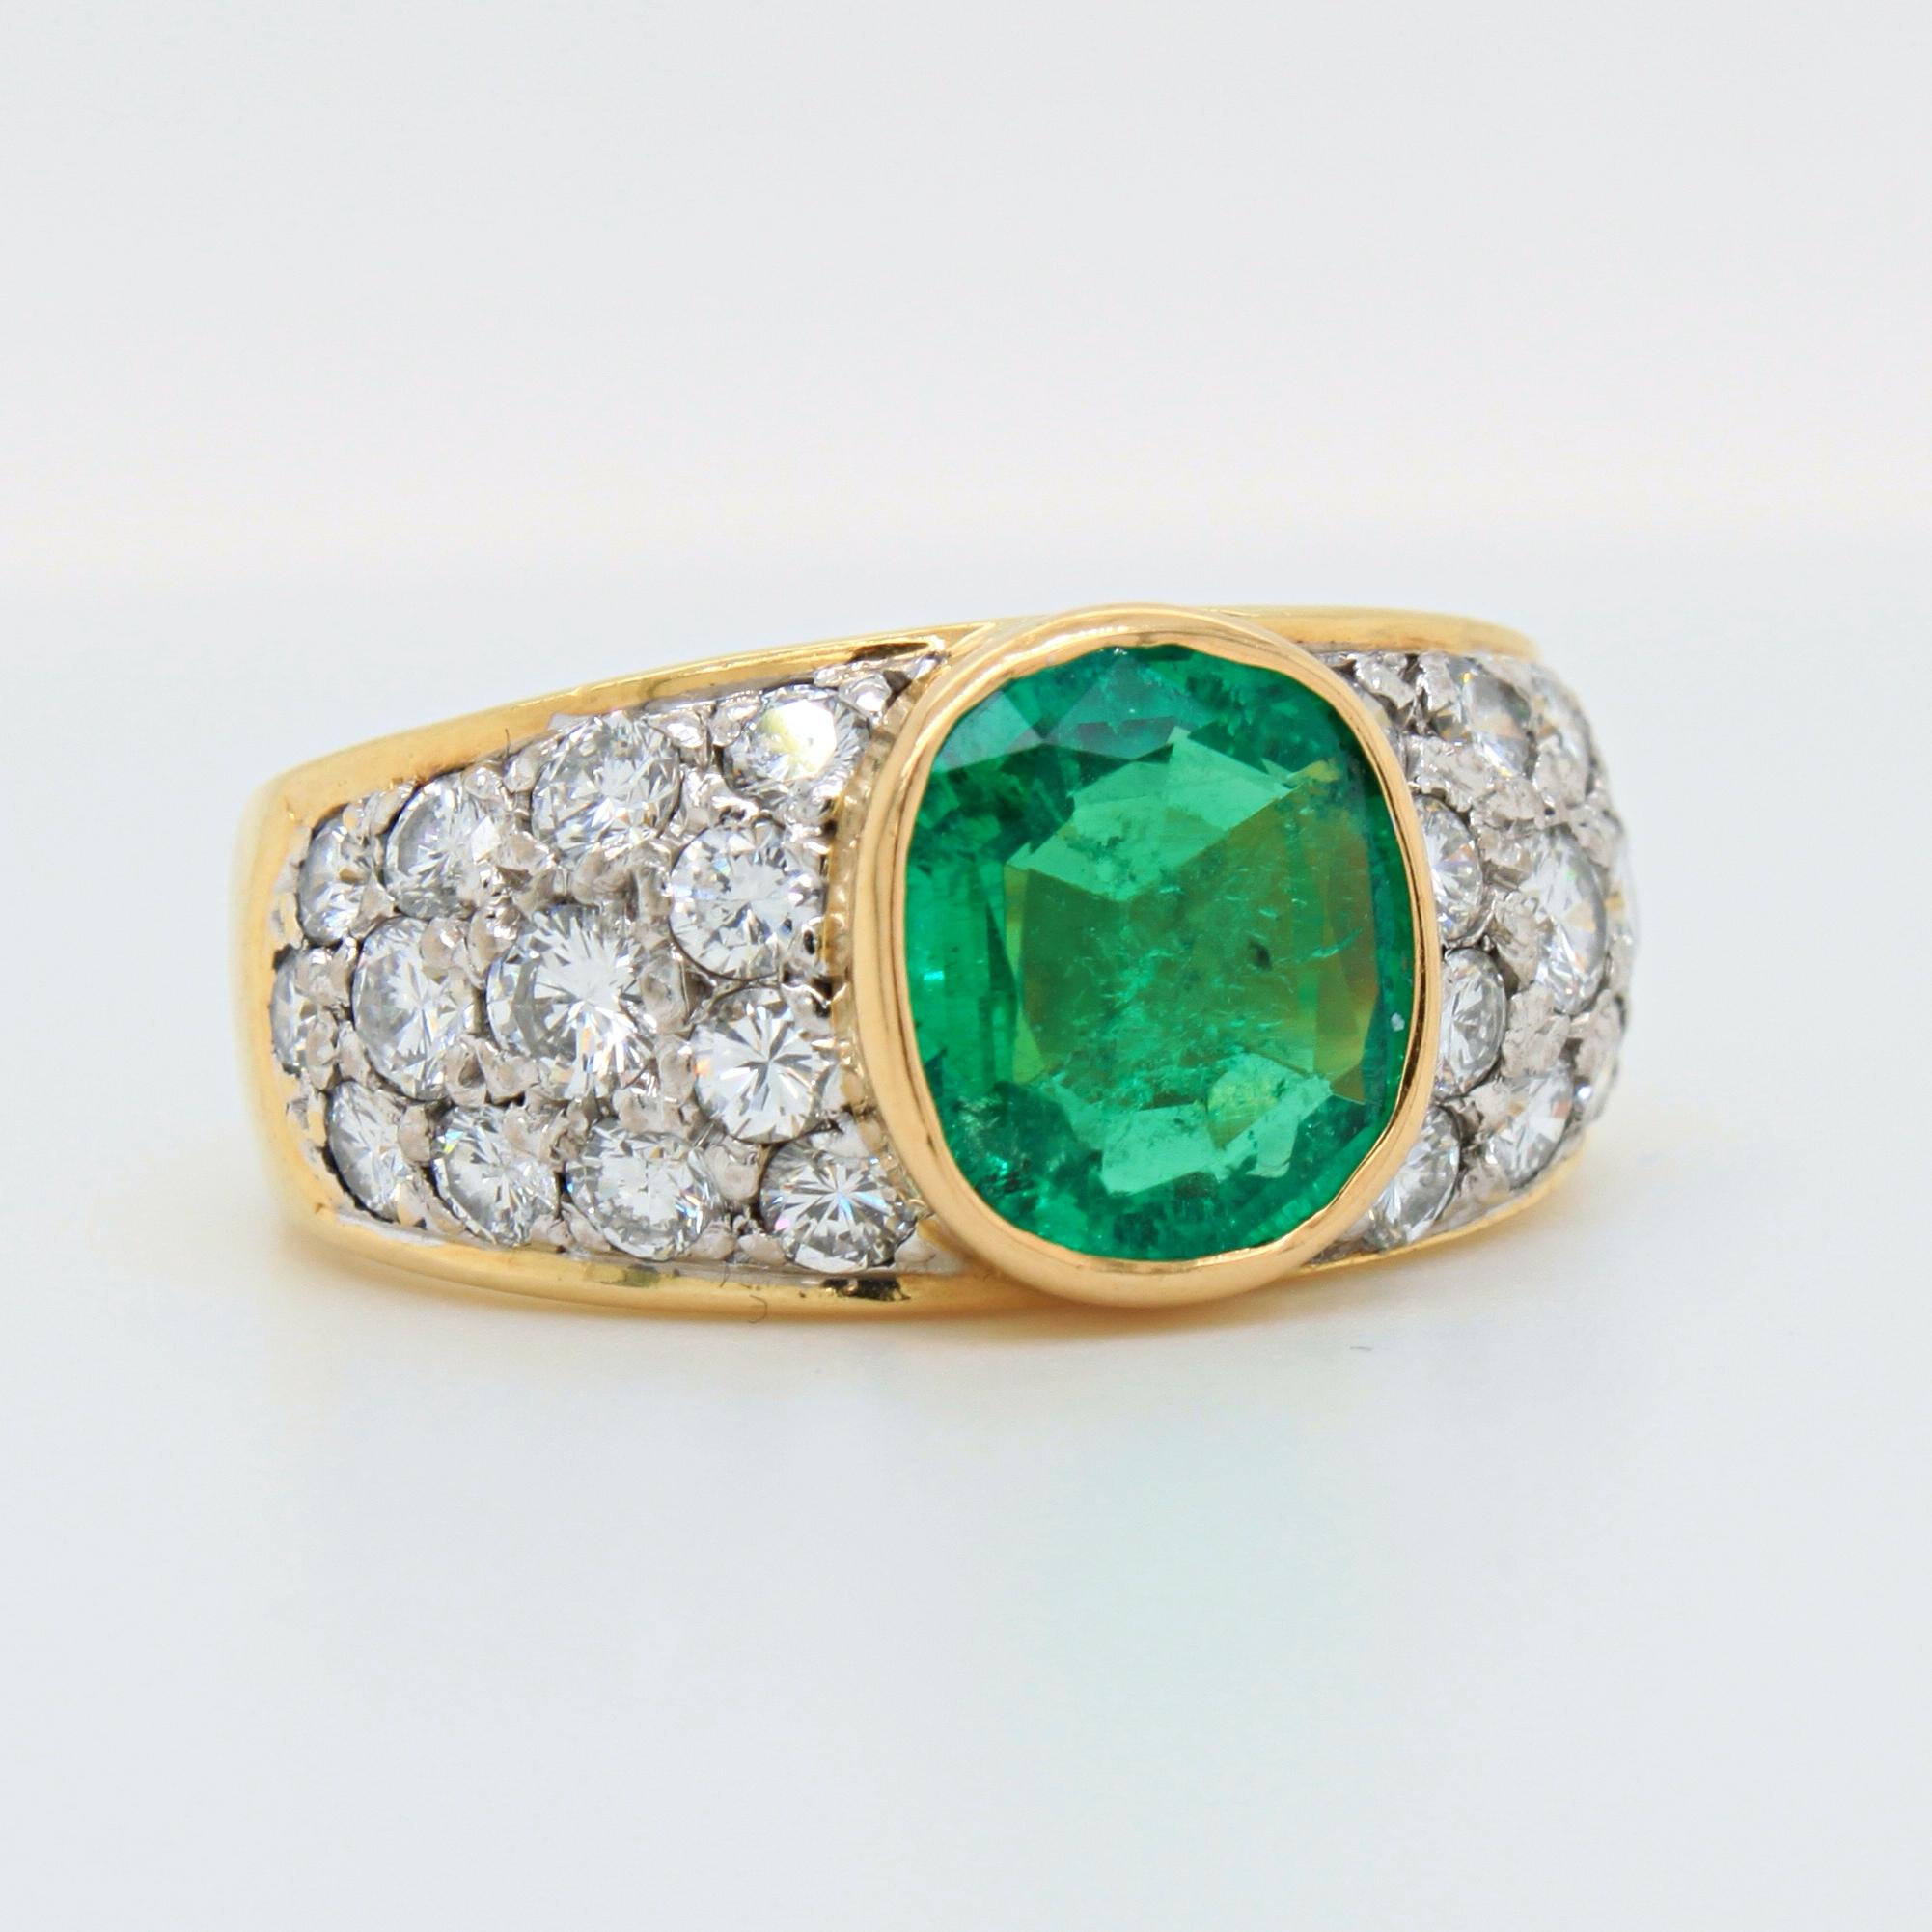 Antique Cushion Cut Colombian Emerald and Diamond Ring